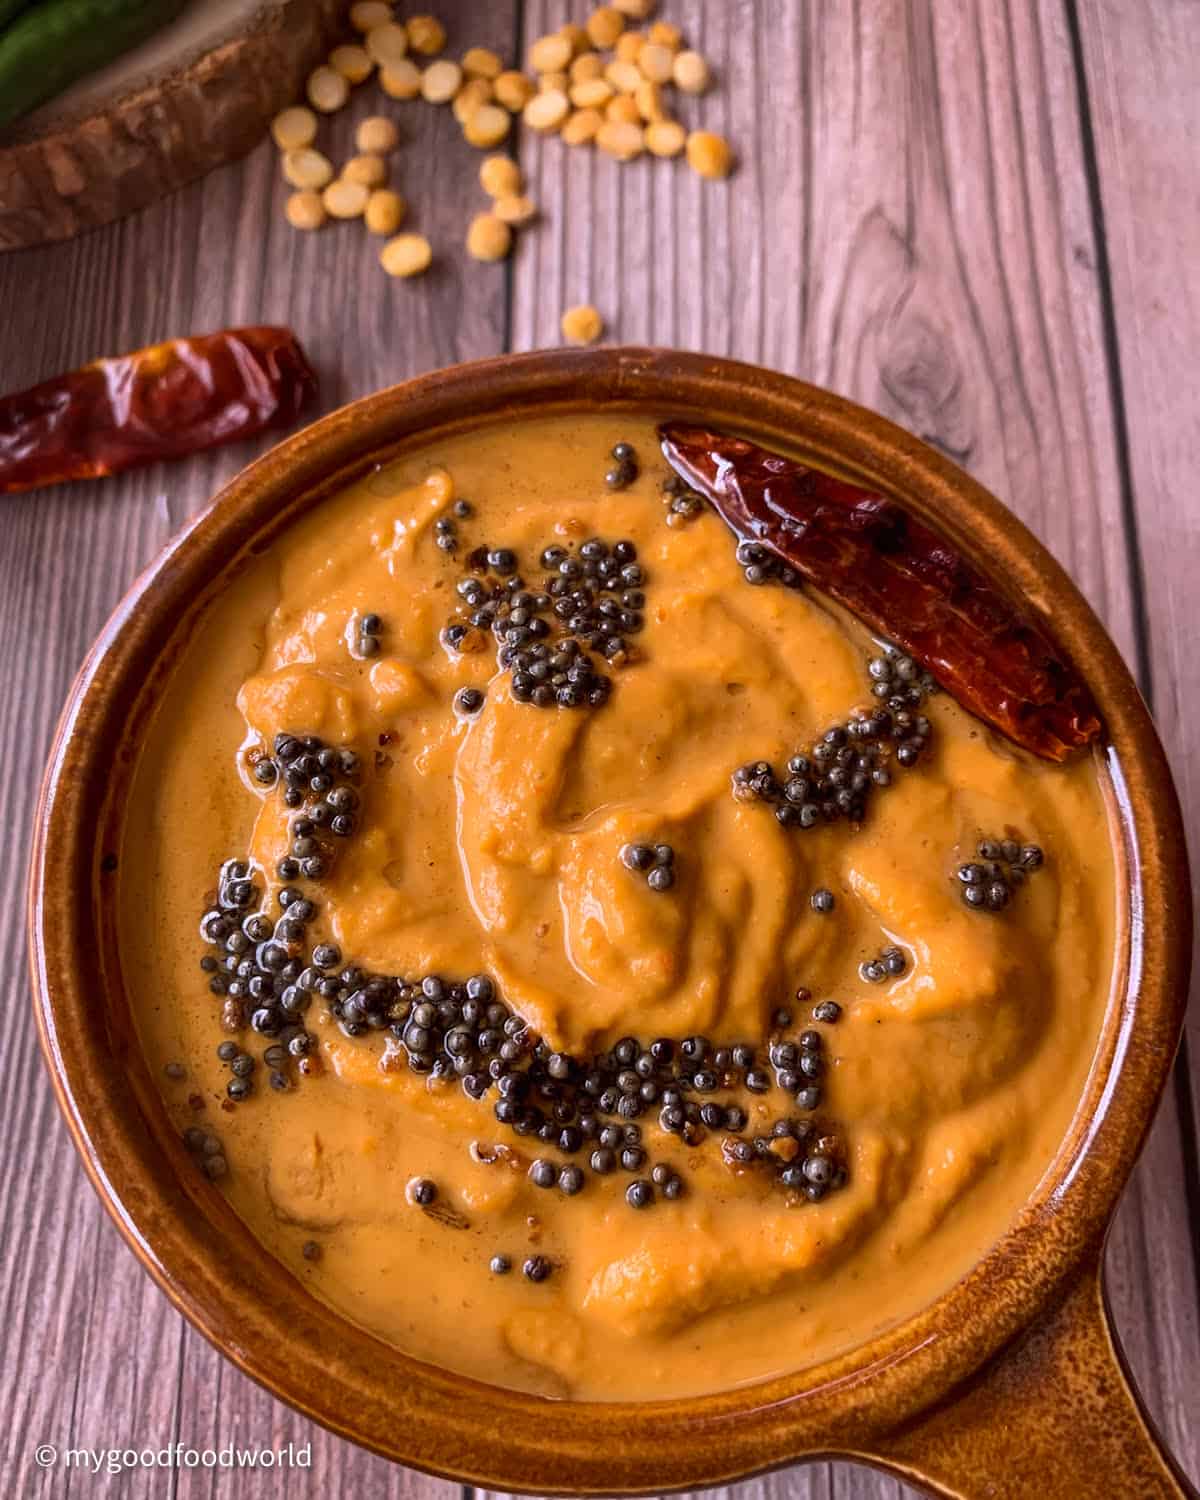 Roasted Bengal gram chutney is placed in a brown colored ceramic bowl with handle. The chutney is garnished with some brown mustard seeds fried in oil and a fried red chili.